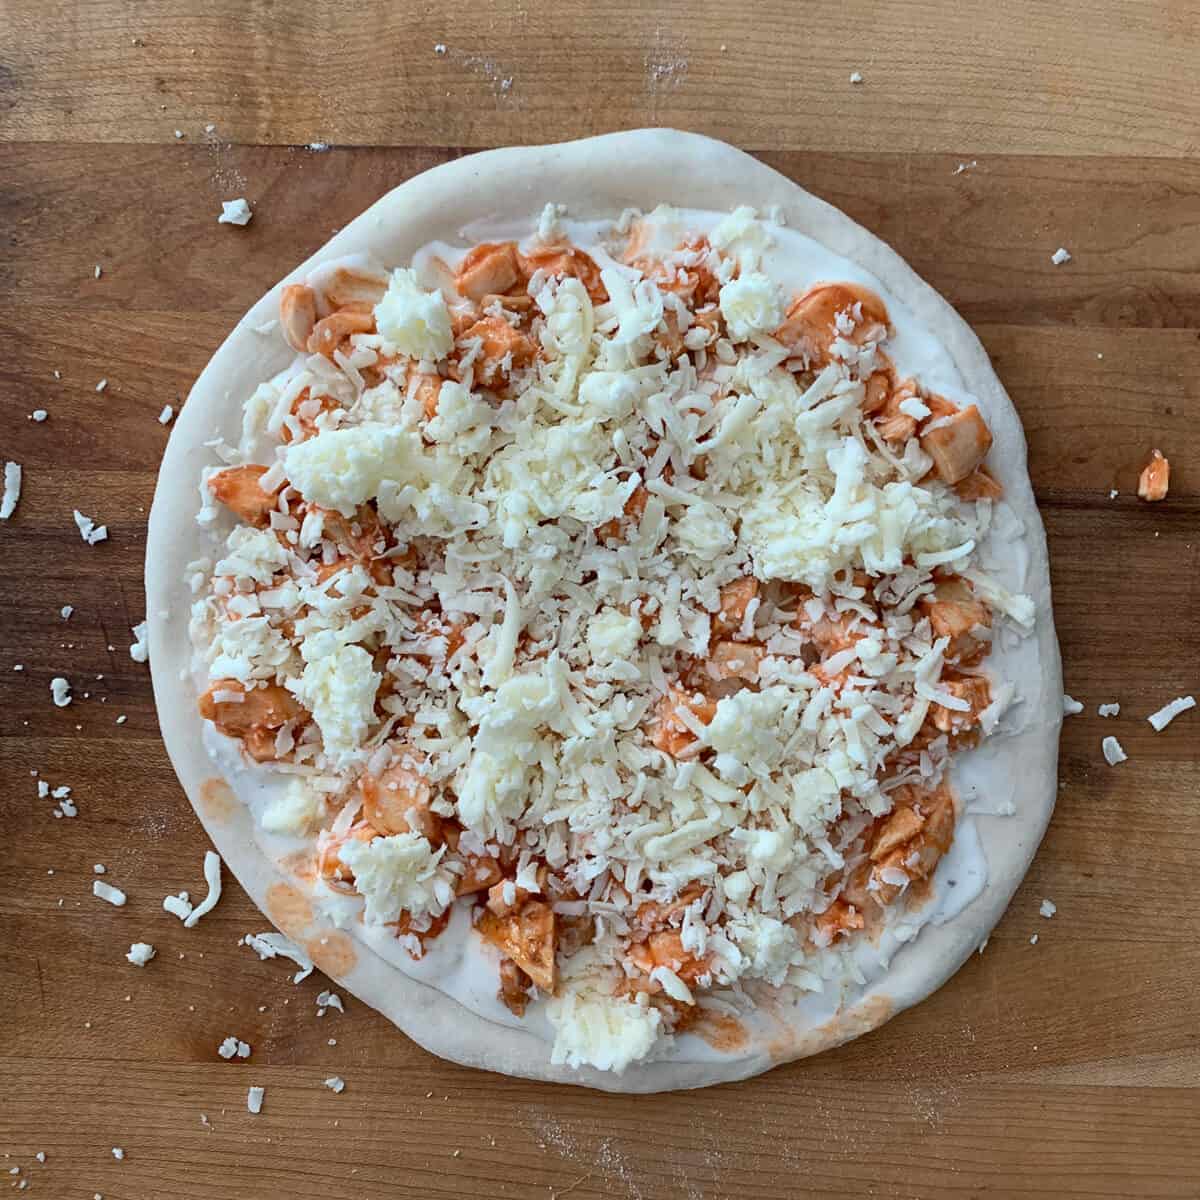 unbaked buffalo chicken pizza on wooden background